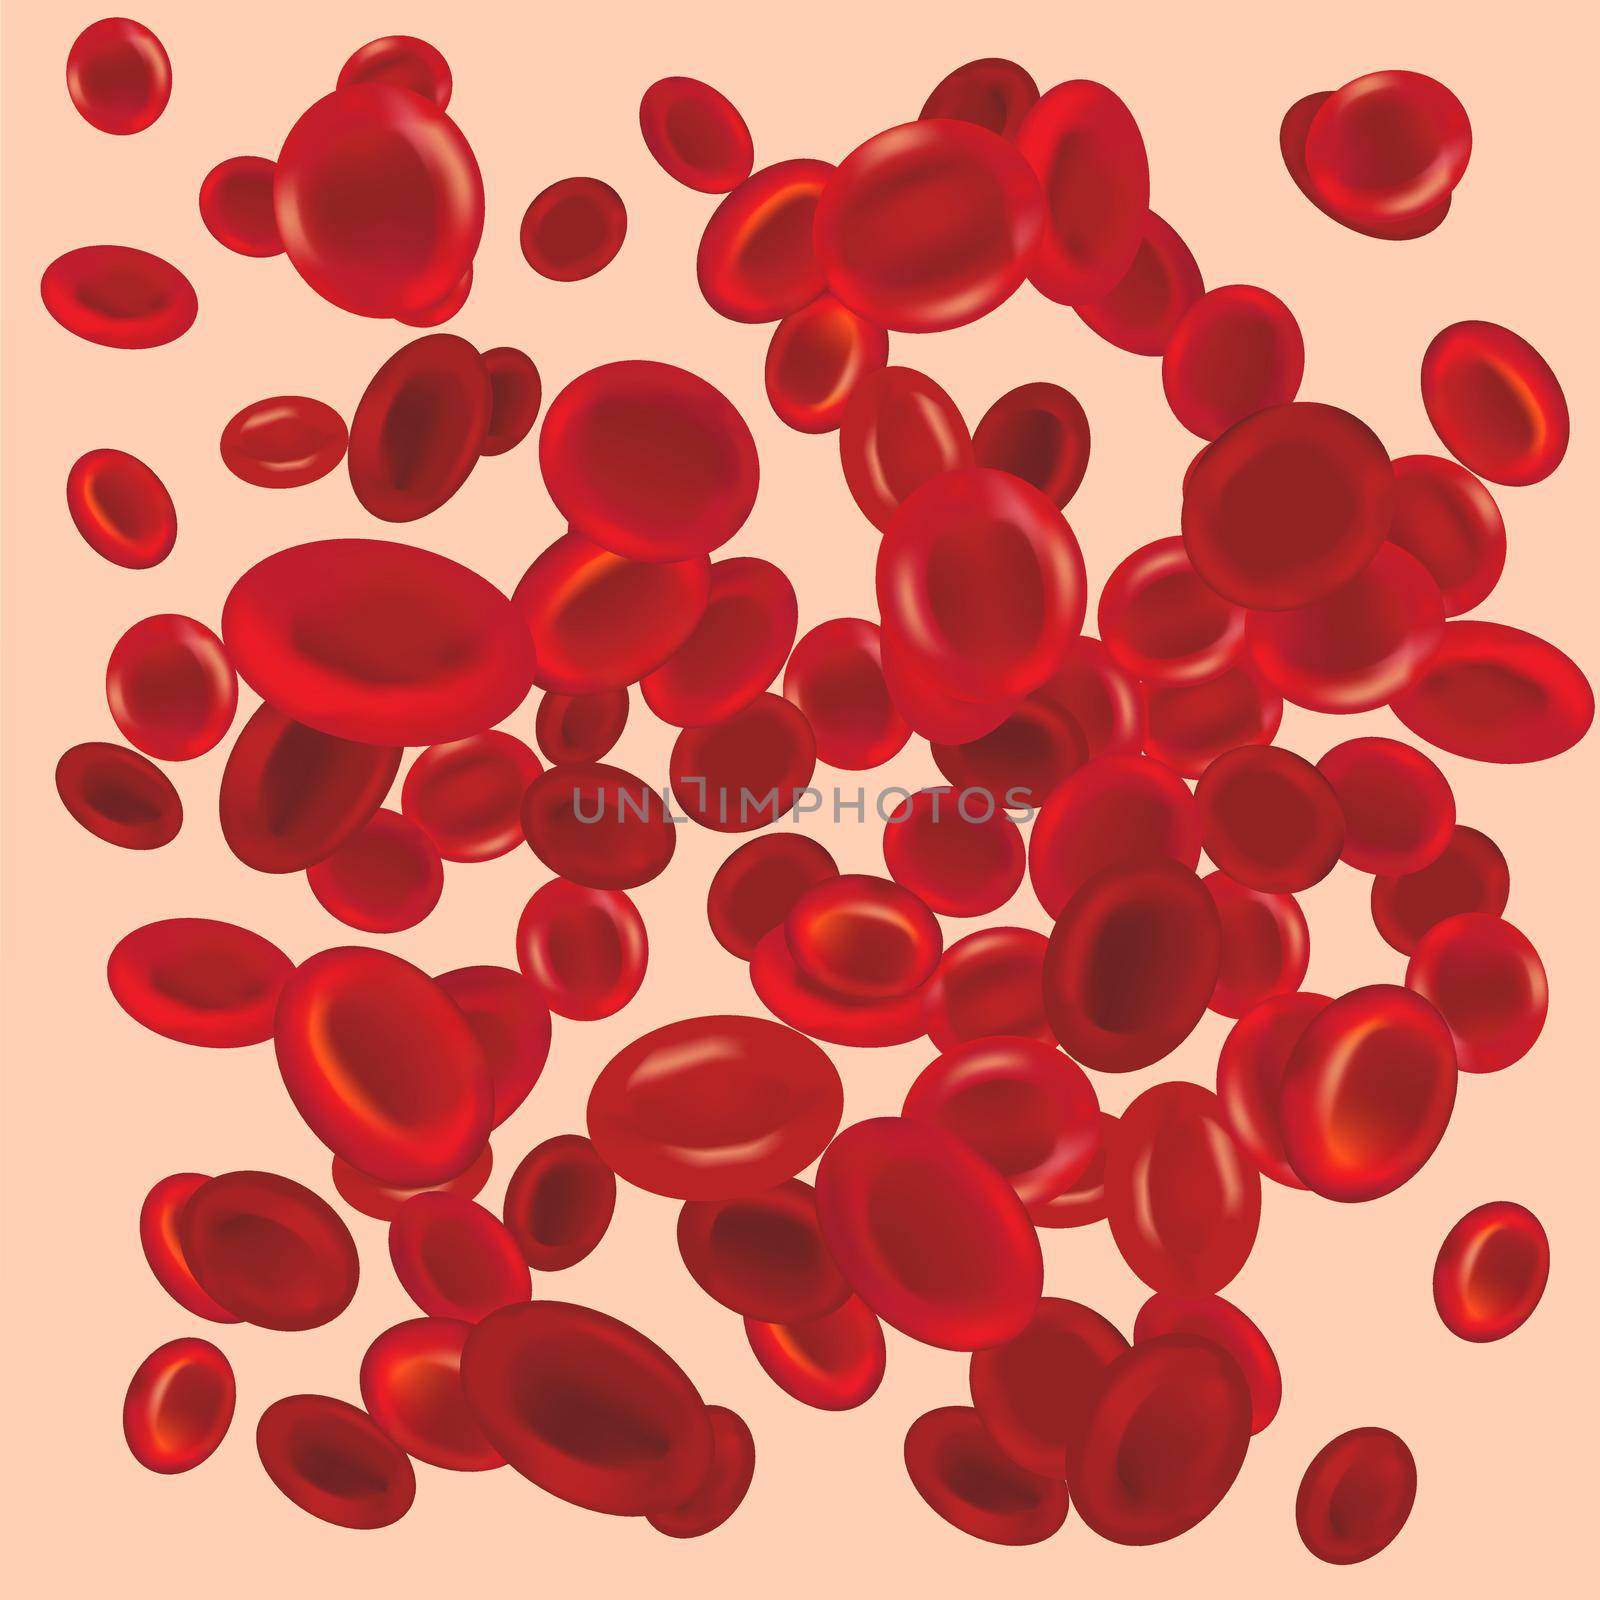 Flowing red blood cells in arthery, erythrocyte background by Olena758